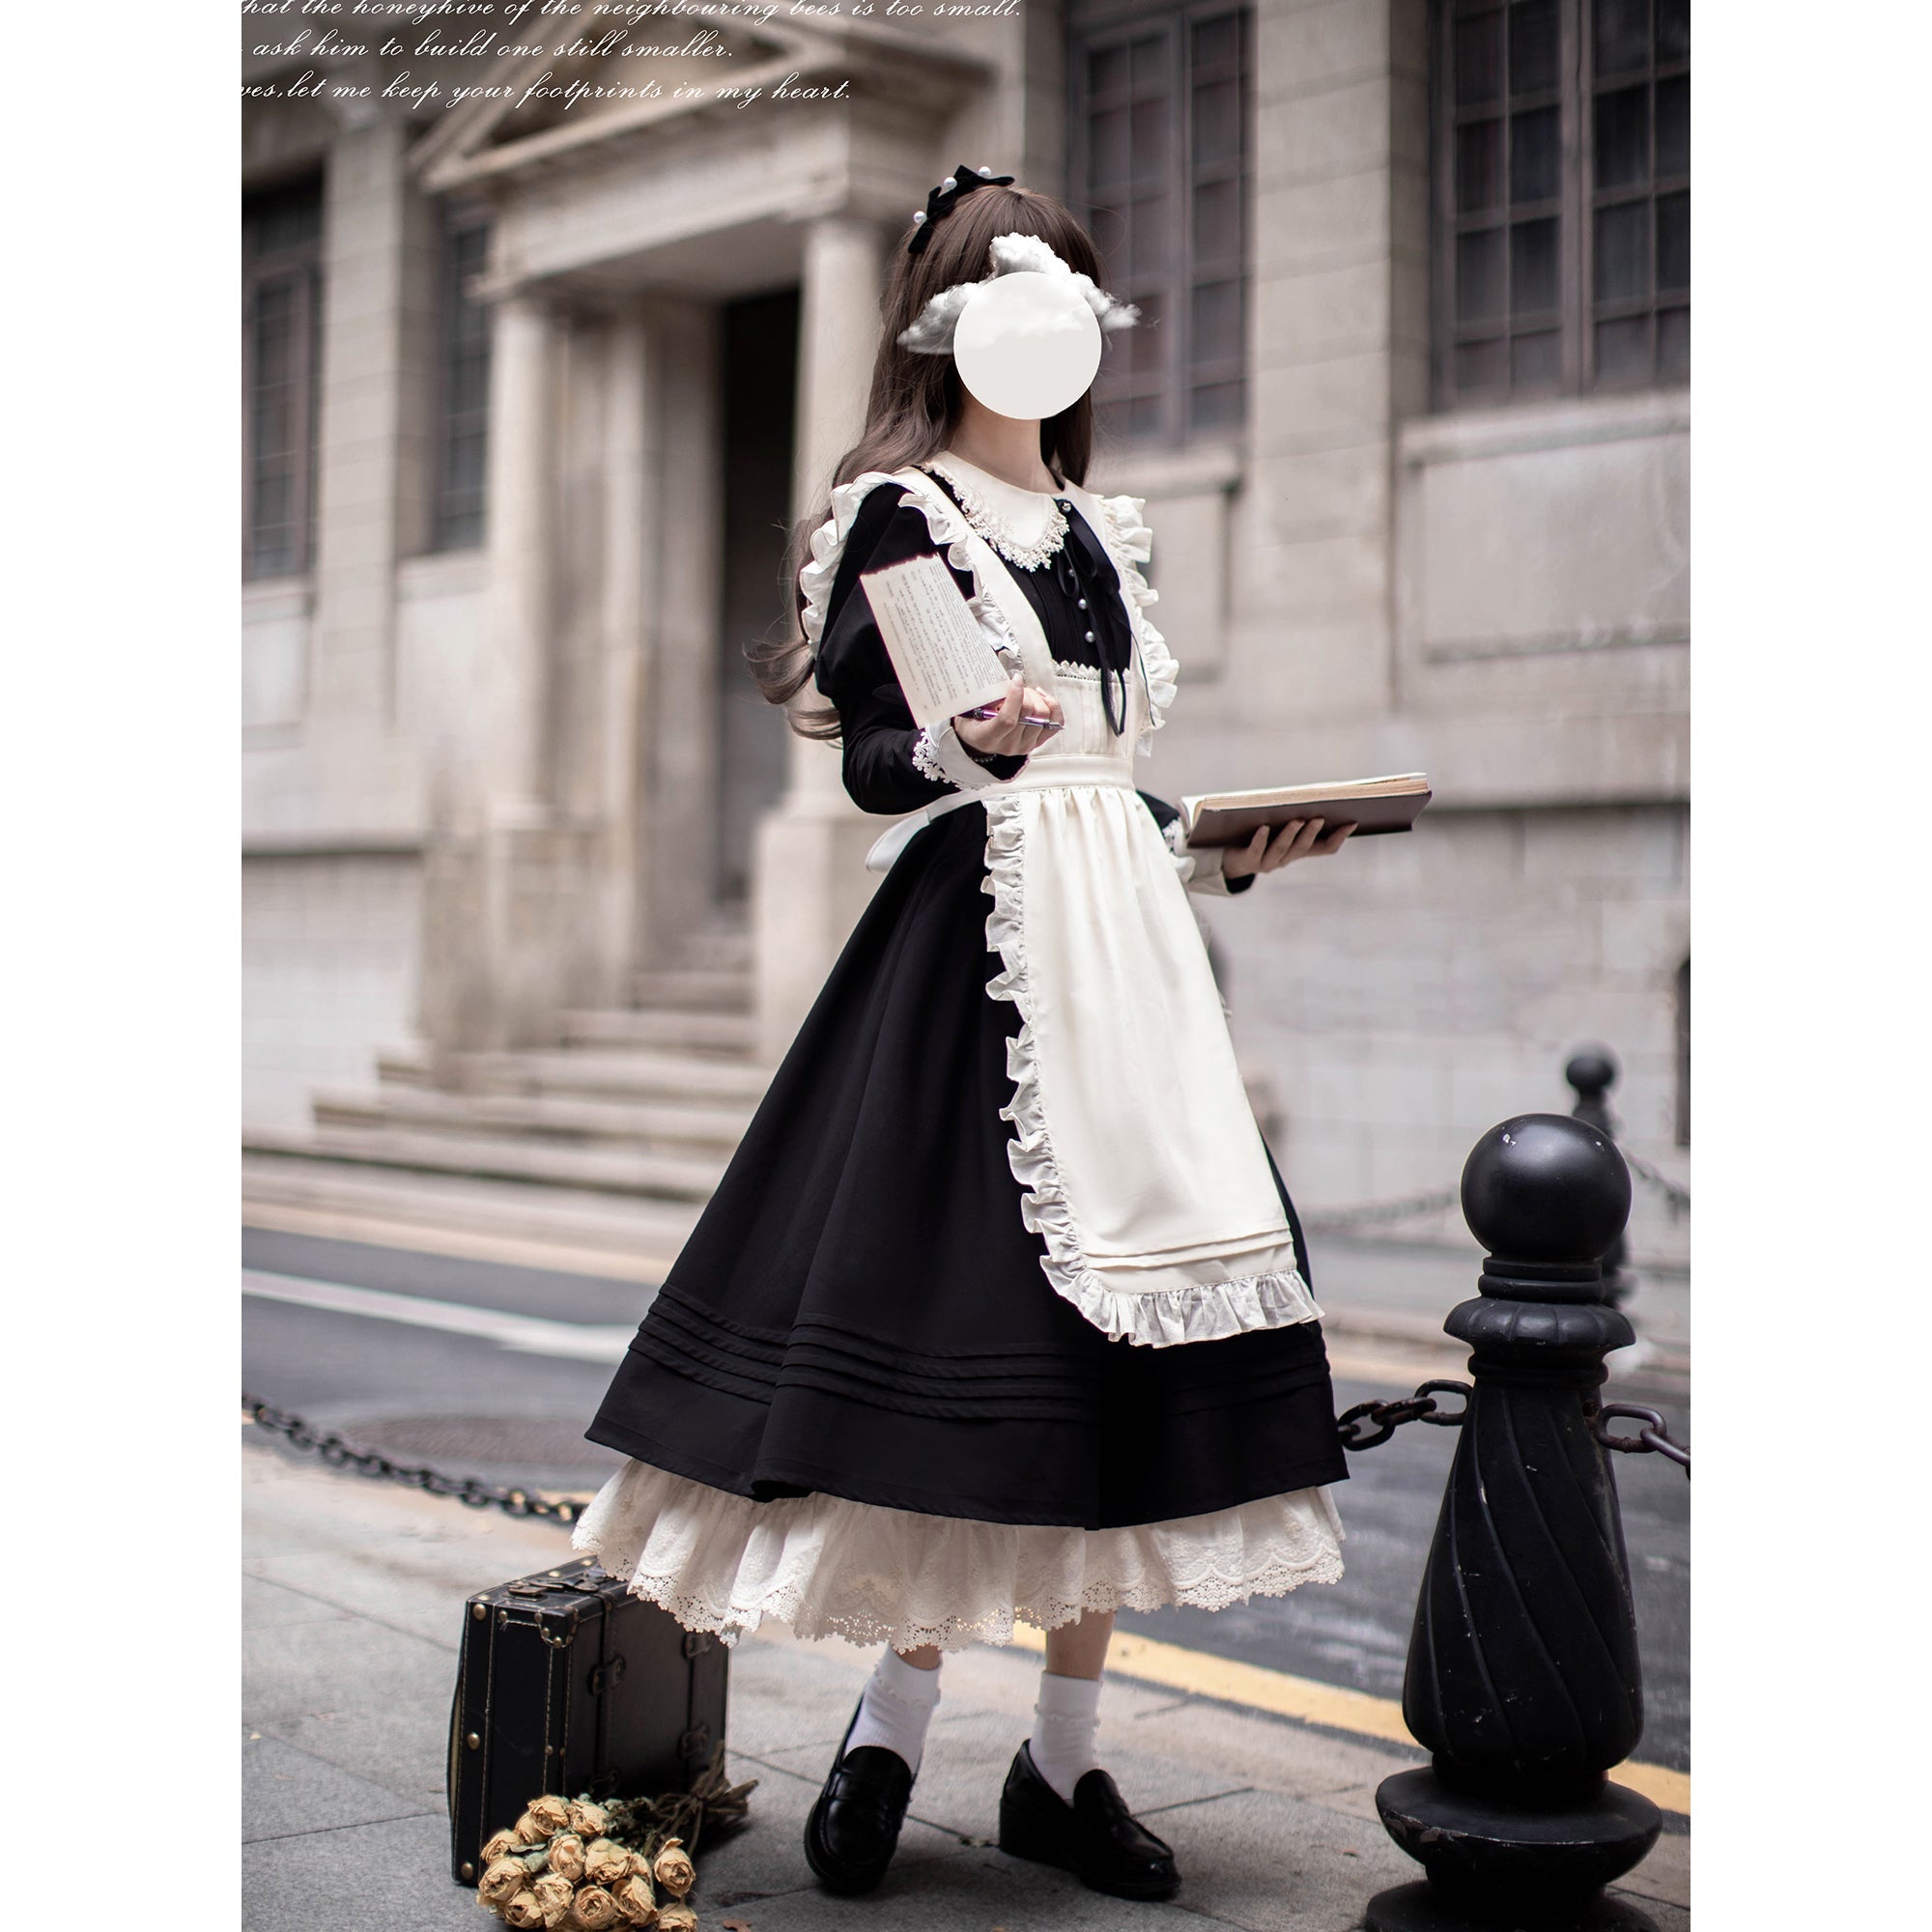 Delivery maid's classic dress and apron